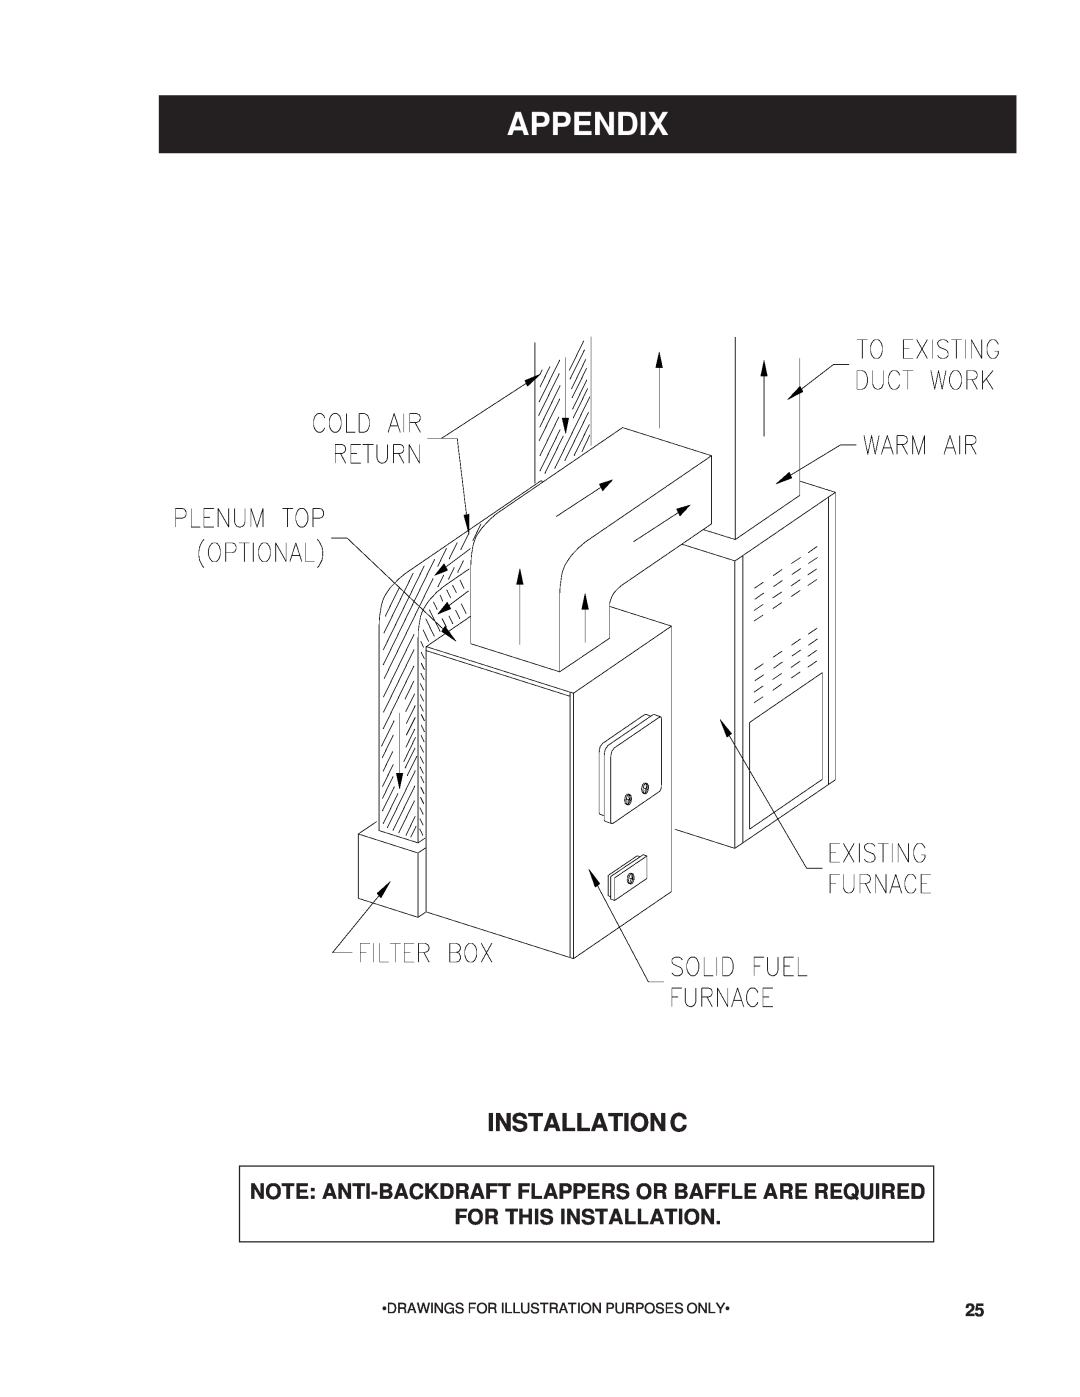 United States Stove 22AF owner manual Installation C, Appendix, Drawings For Illustration Purposes Only 